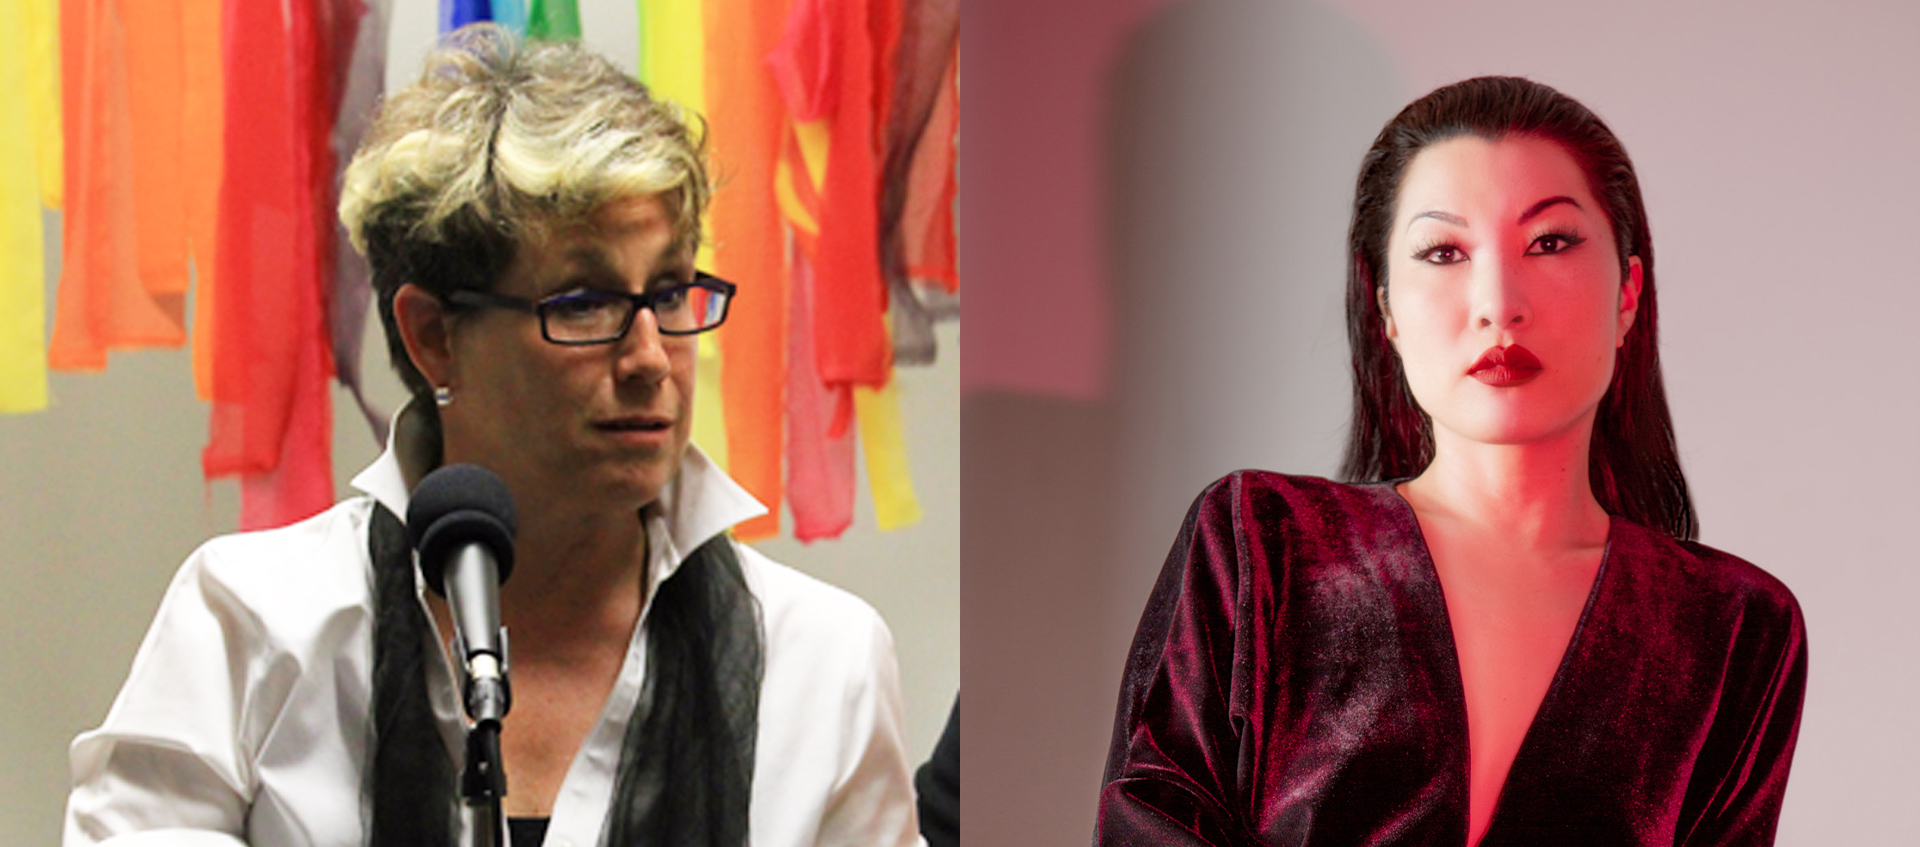 On the left, artist Jerri Allyn has short blonde hair; is wearing a white-collared shirt and black scarf; and is standing behind a microphone in front of a backdrop of red, orange, and yellow streams of fabric. On the right, artist Kayla Tange has long, slicked-back dark hair; is looking into the camera; and is wearing a shimmery, dark red V-neck and red lipstick.